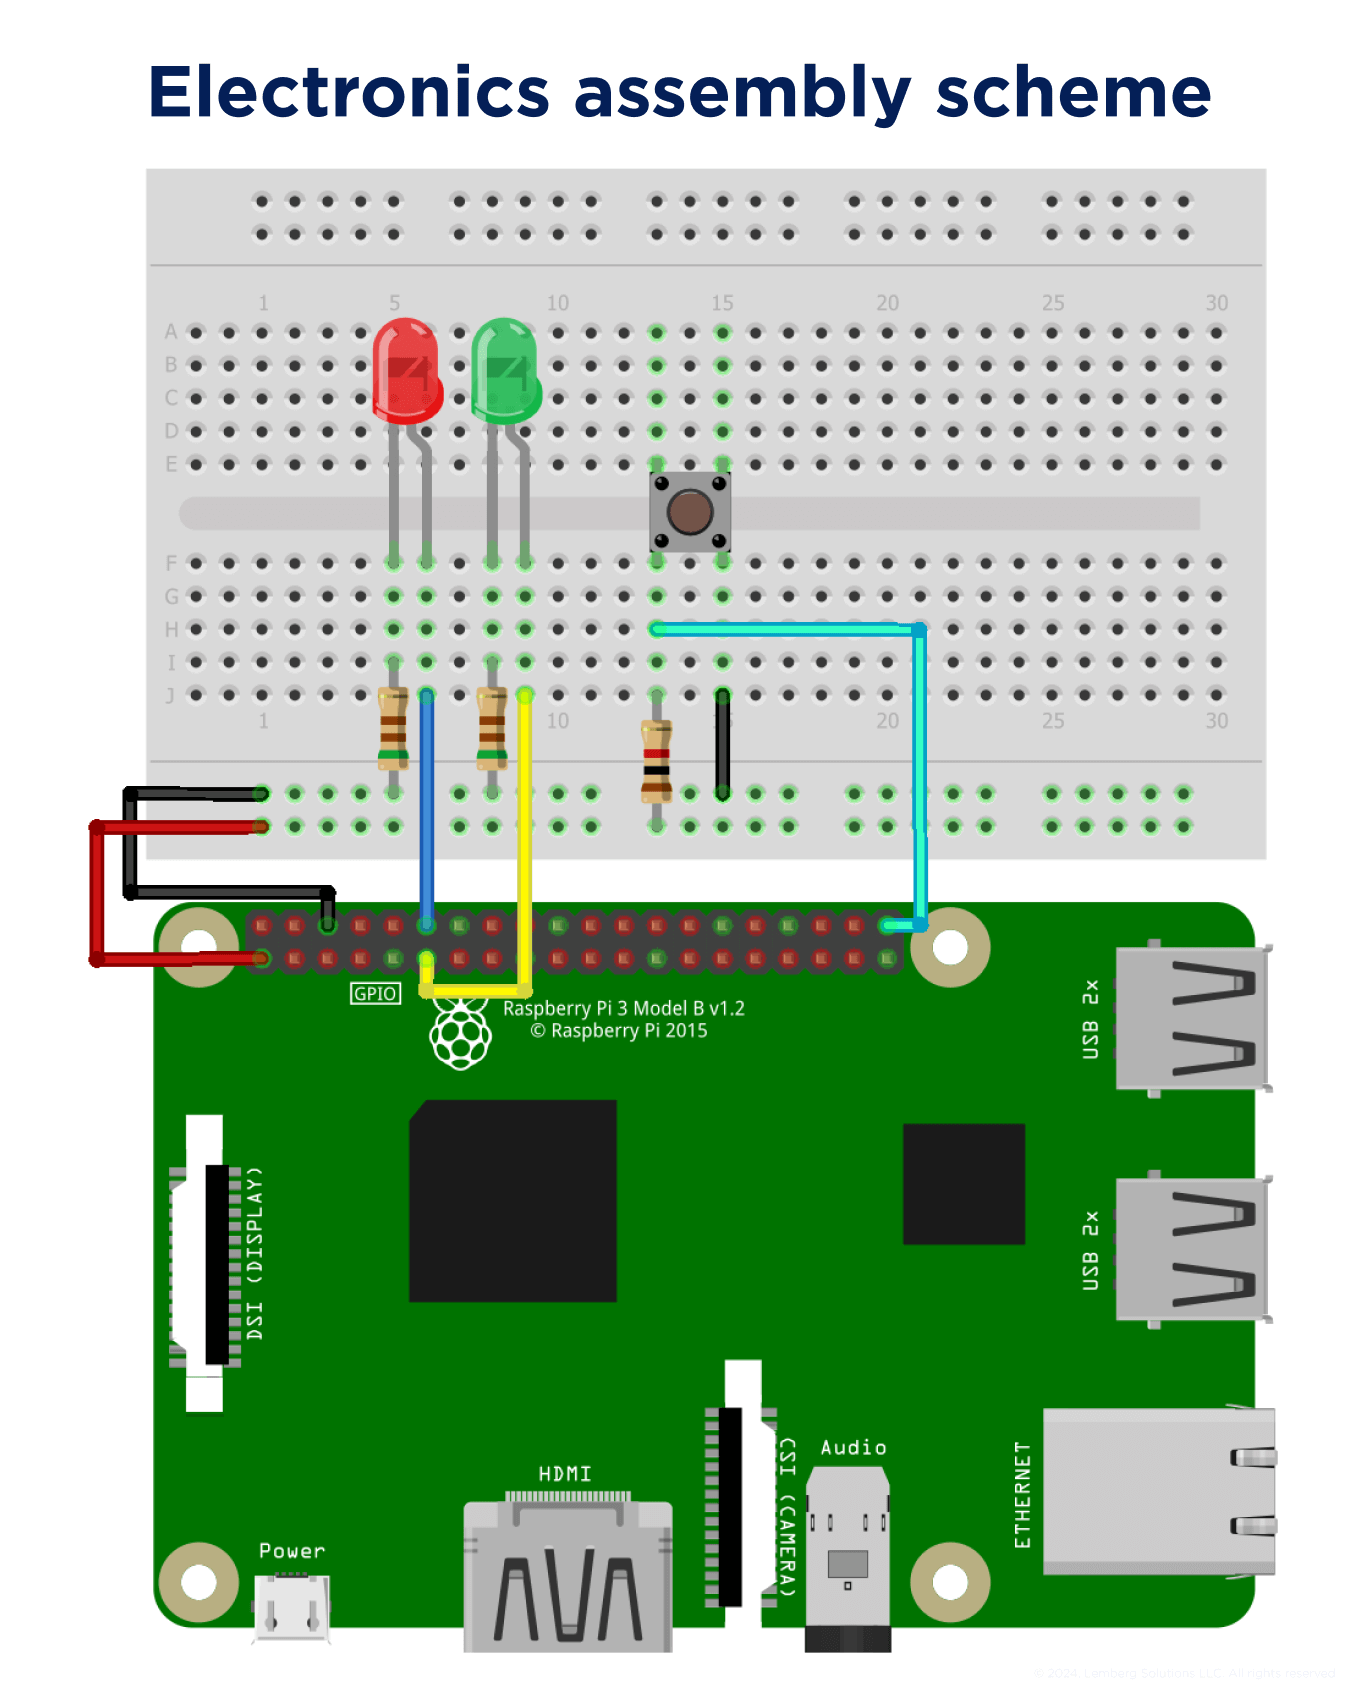 Rapid Hardware Prototyping_ Connect Your Raspberry Pi to Google Cloud IoT - Body Image - Lemberg Solutions 4.png